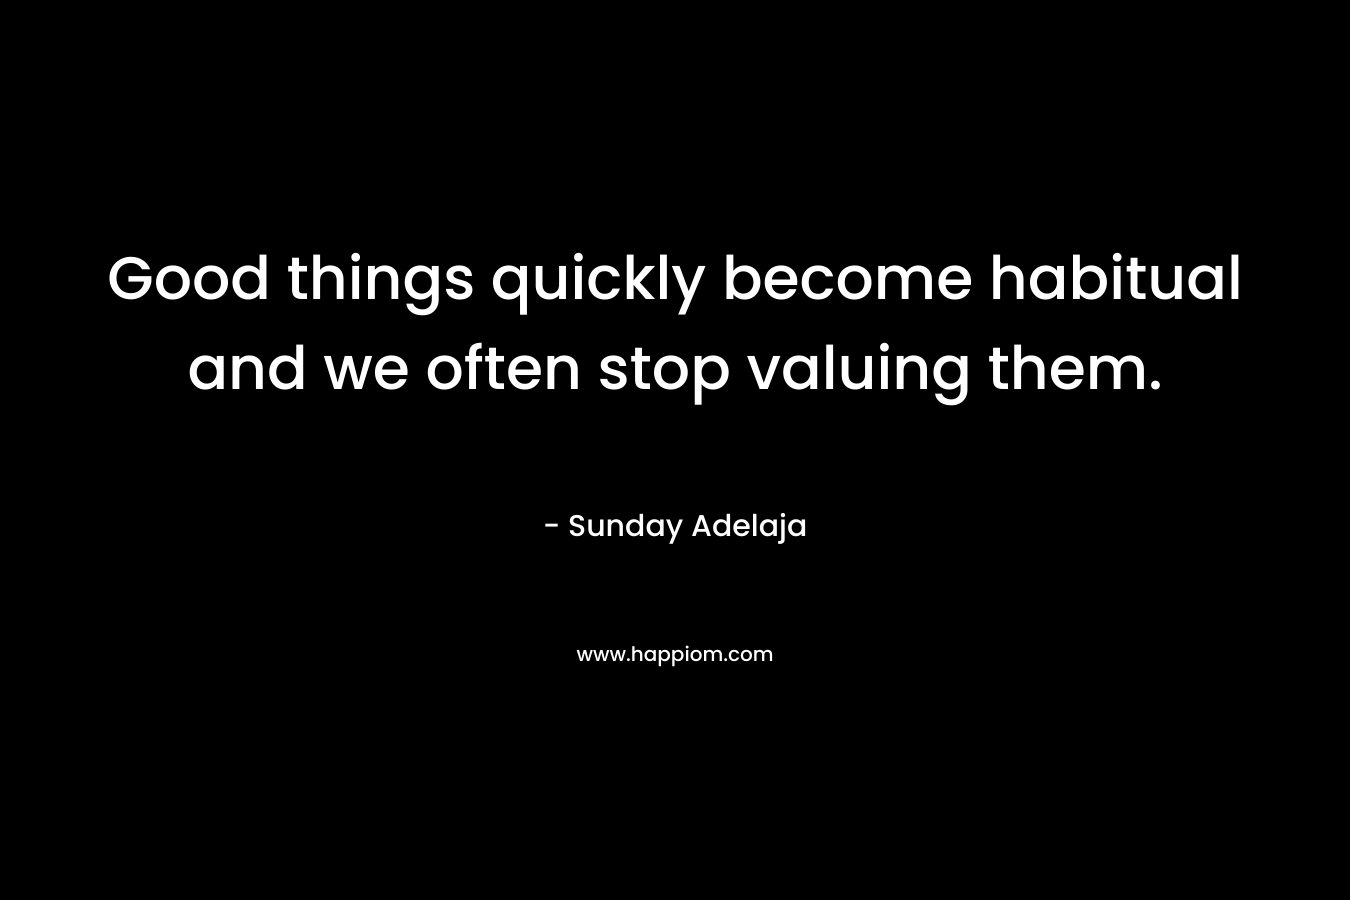 Good things quickly become habitual and we often stop valuing them.